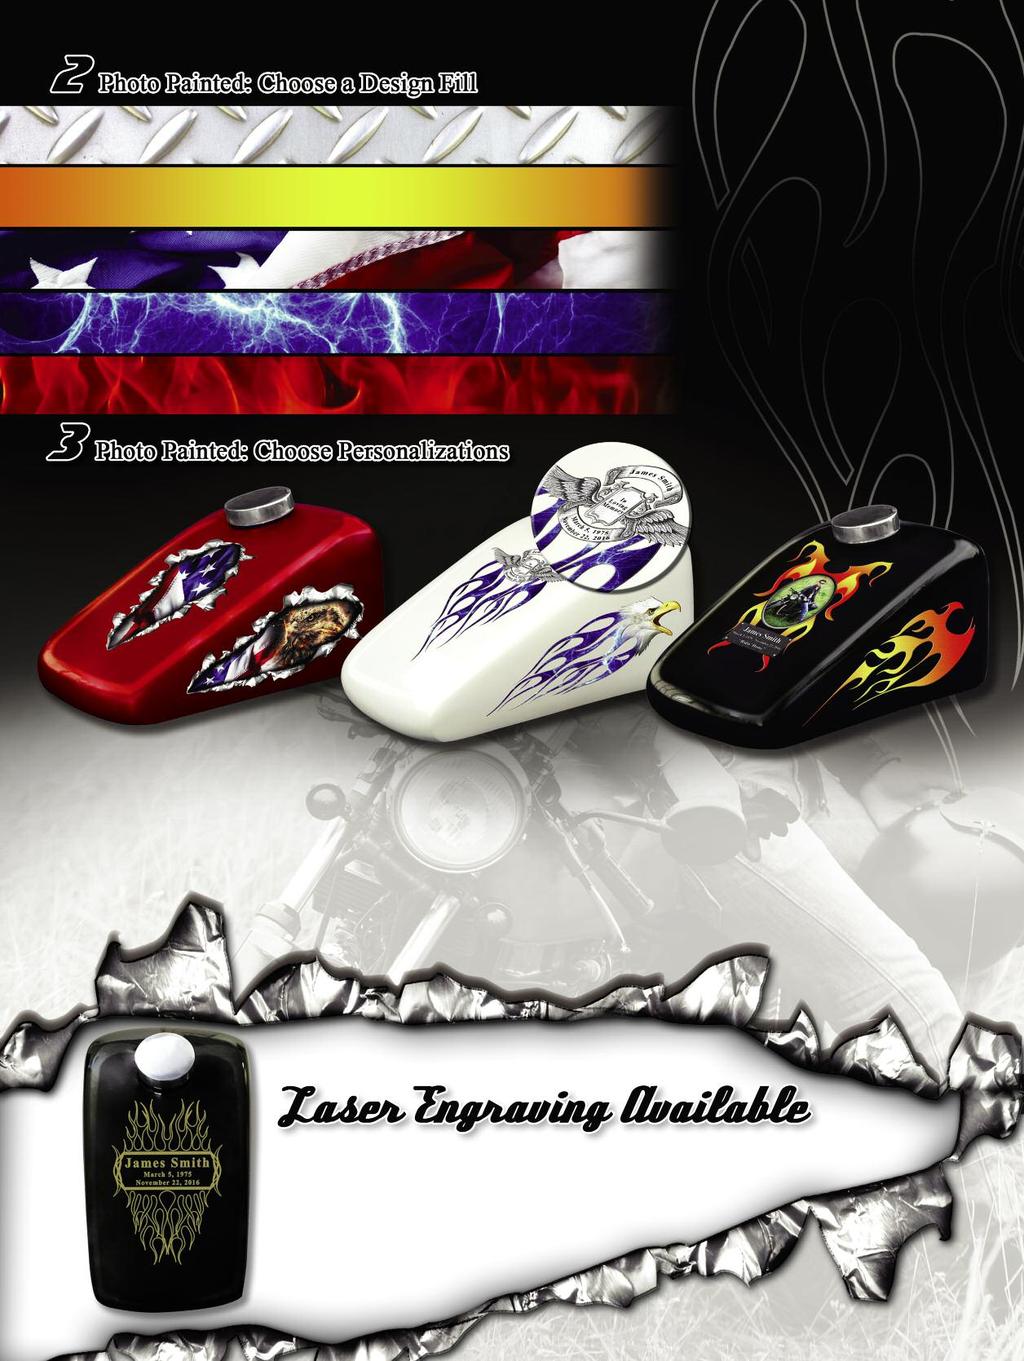 Tread Plate Gradient *Available in orange (shown), green, blue and purple **Only For Design: Flames Patriotic Electricity Traditional Flames *Available in red (shown), green, blue and purple Stock